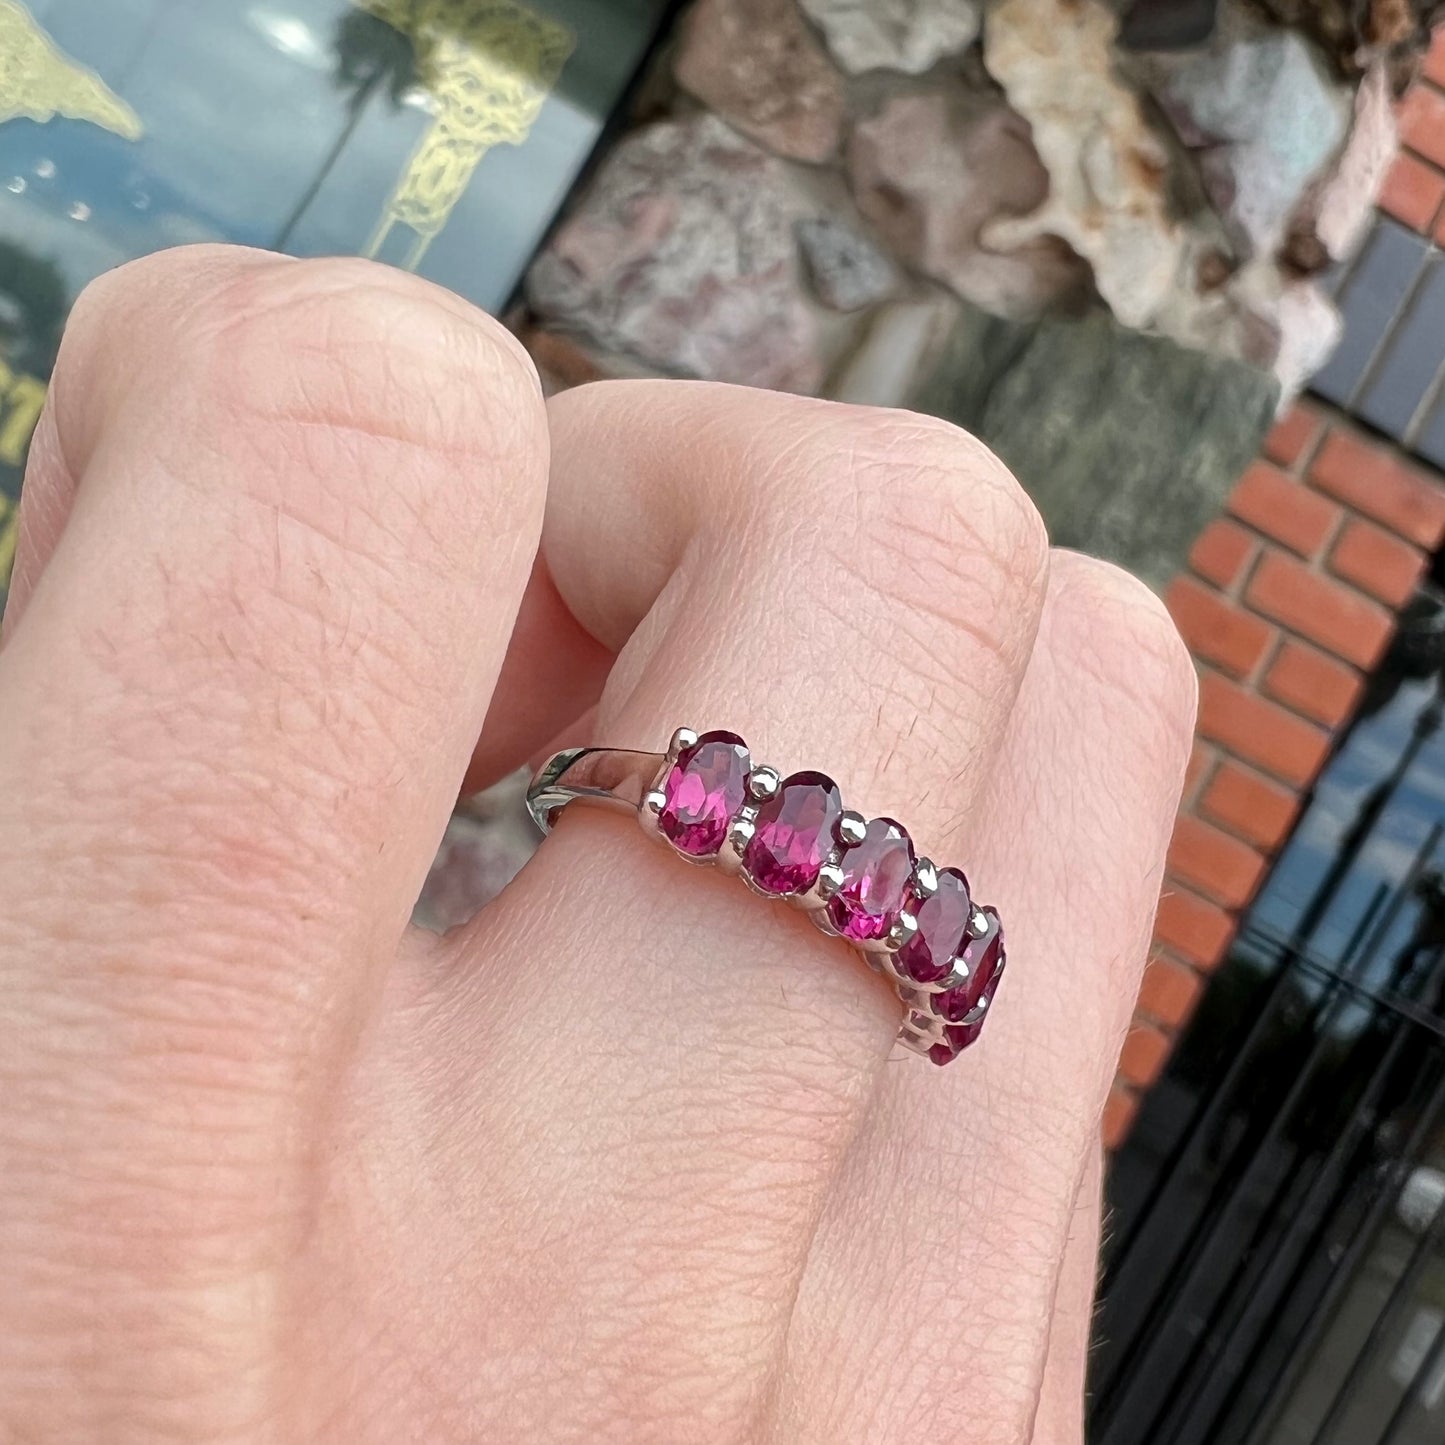 A sterling silver band set with 7 oval cut, purple rhodolite garnet stones.